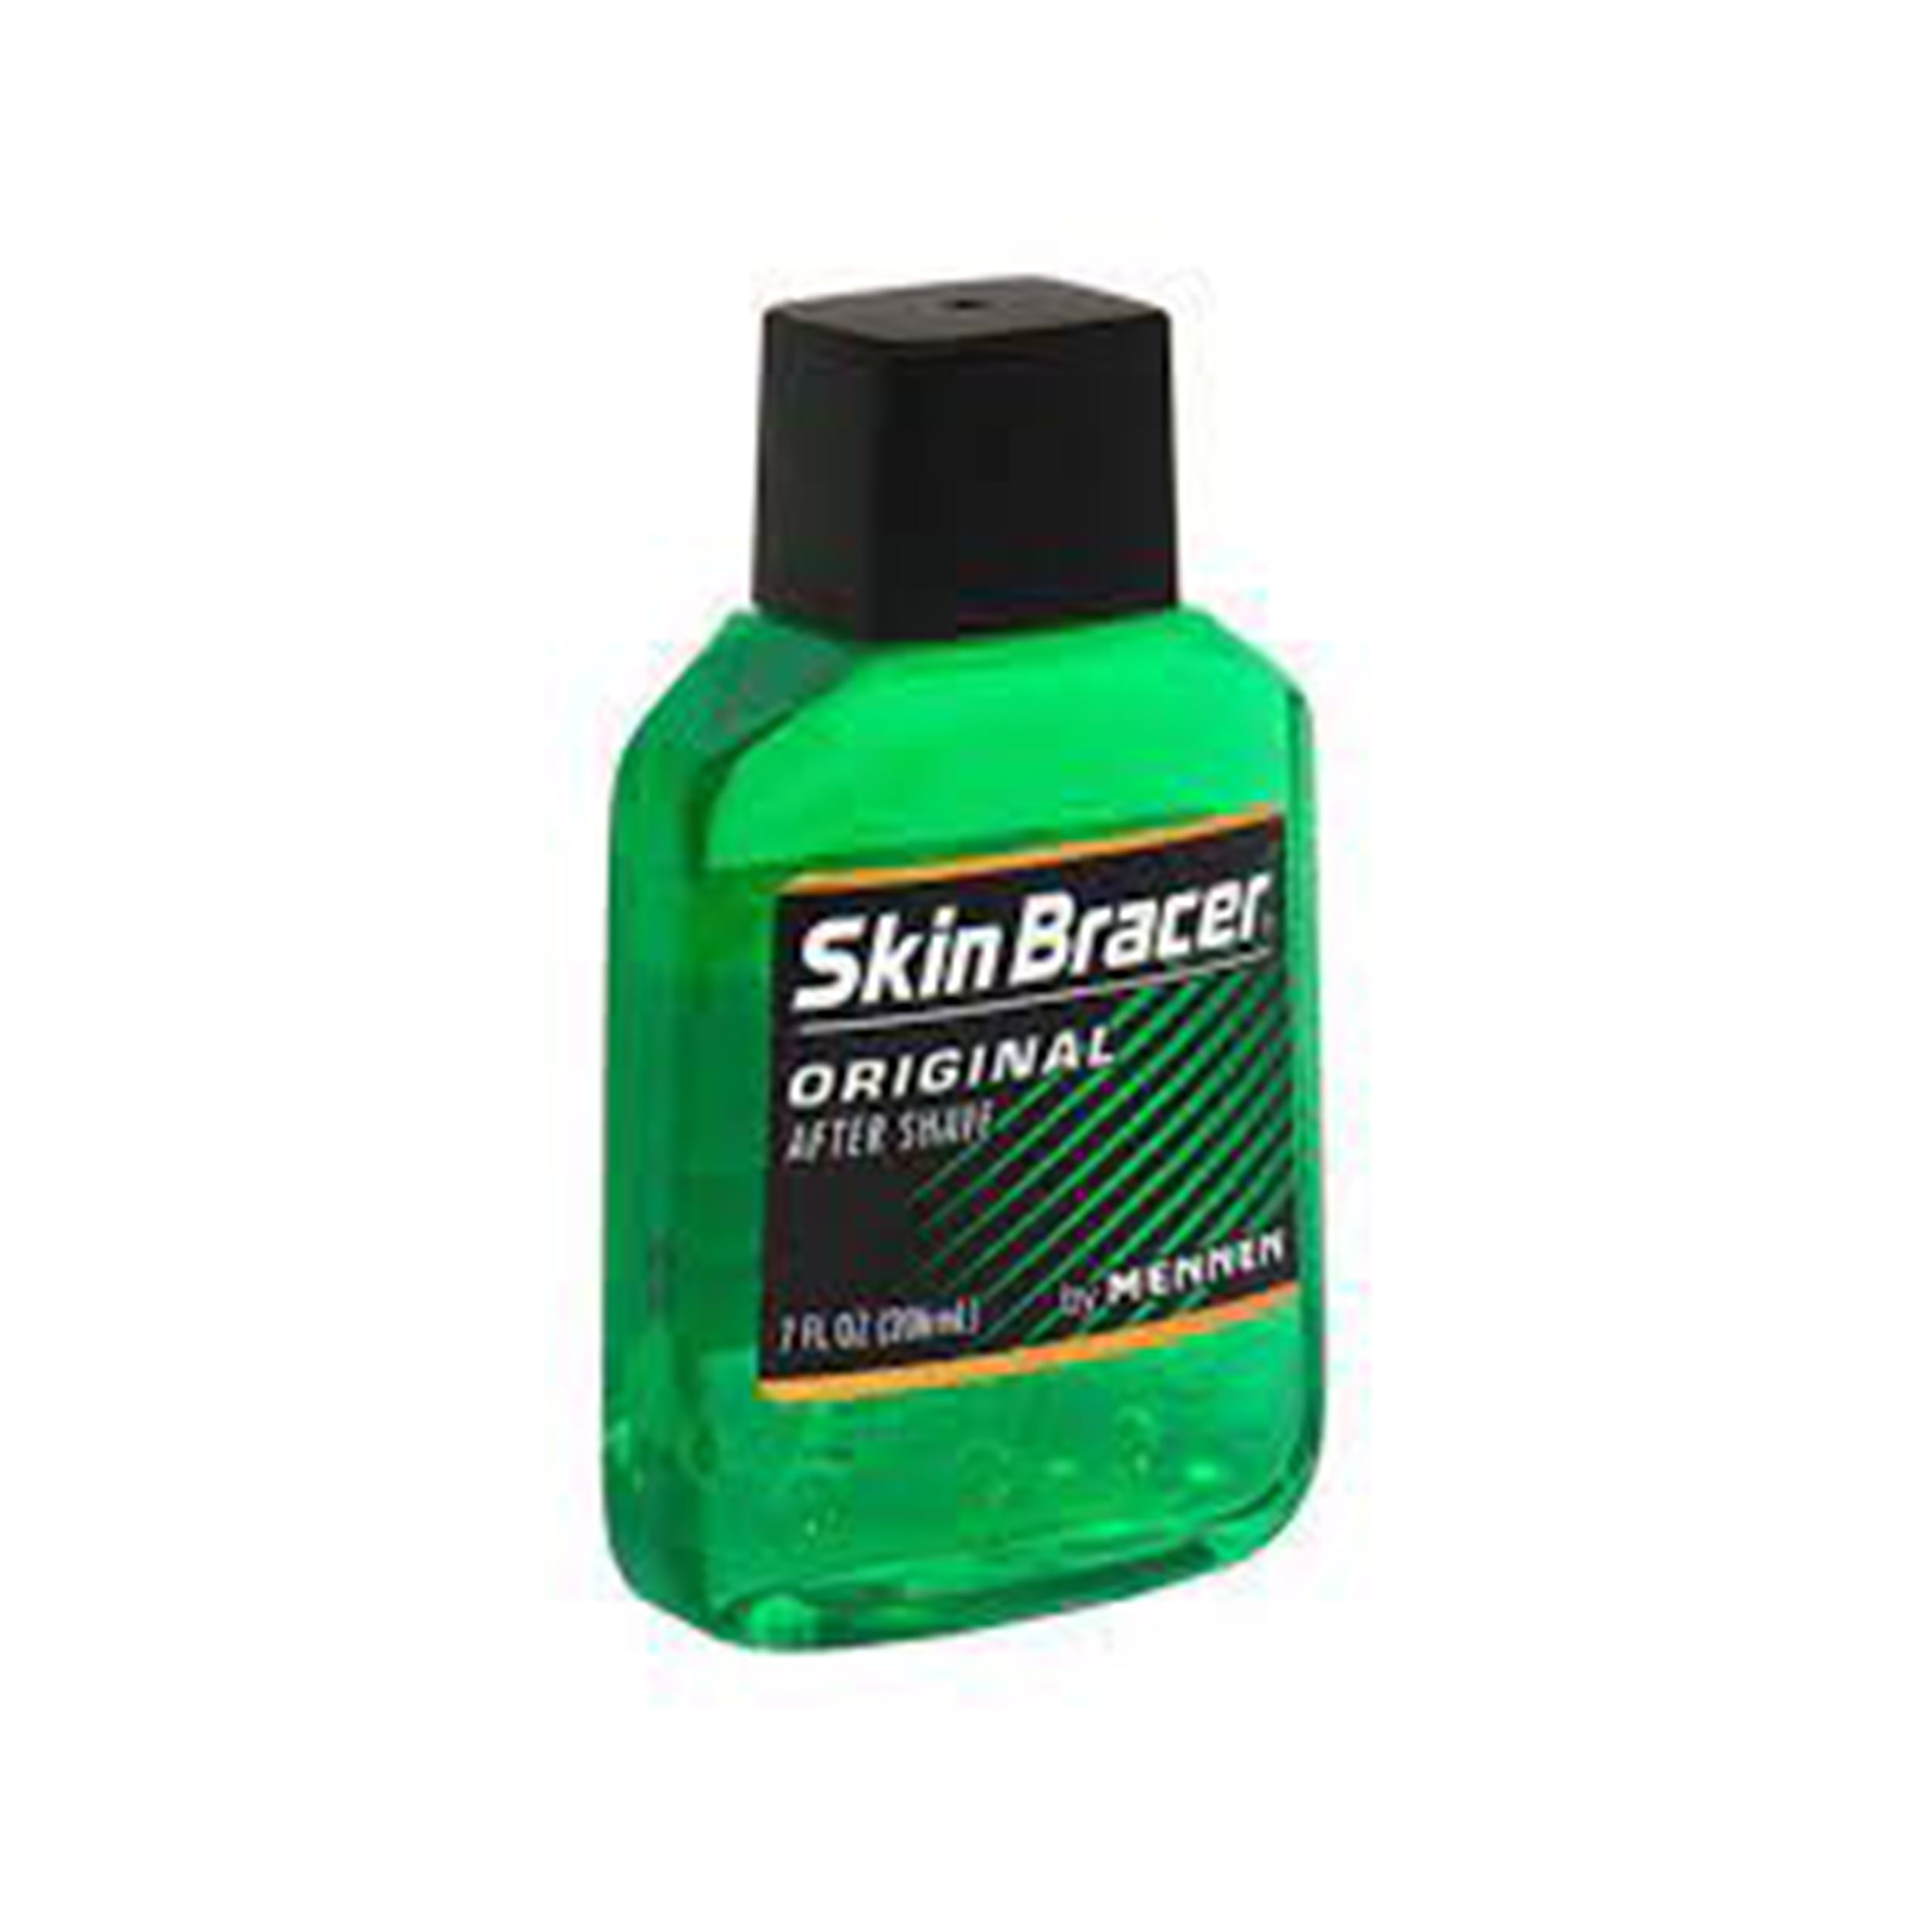 Skin Bracer After Shave Lotion and Skin Conditioner, Original - 5 fluid  ounce 